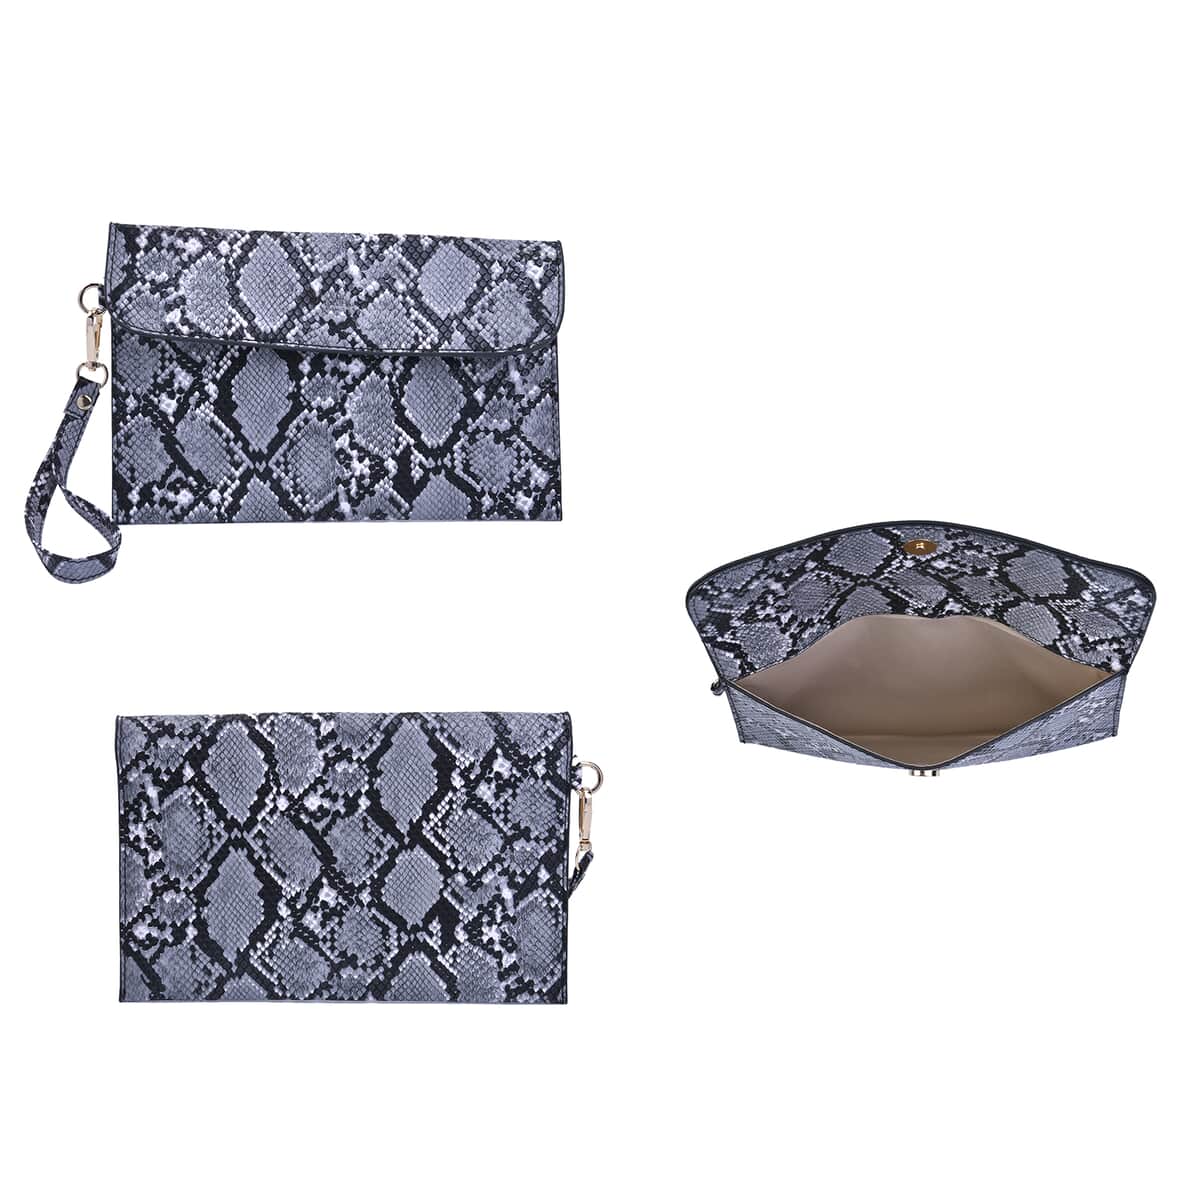 PASSAGE Black Snake Skin Pattern Faux Leather Totebag (13"x4"x10.5"), Crossbody Bag (10.24"x3.15"x7.5"), Clutch Bag (9.84"x6.3") and Wallet (7.87"x4") image number 6